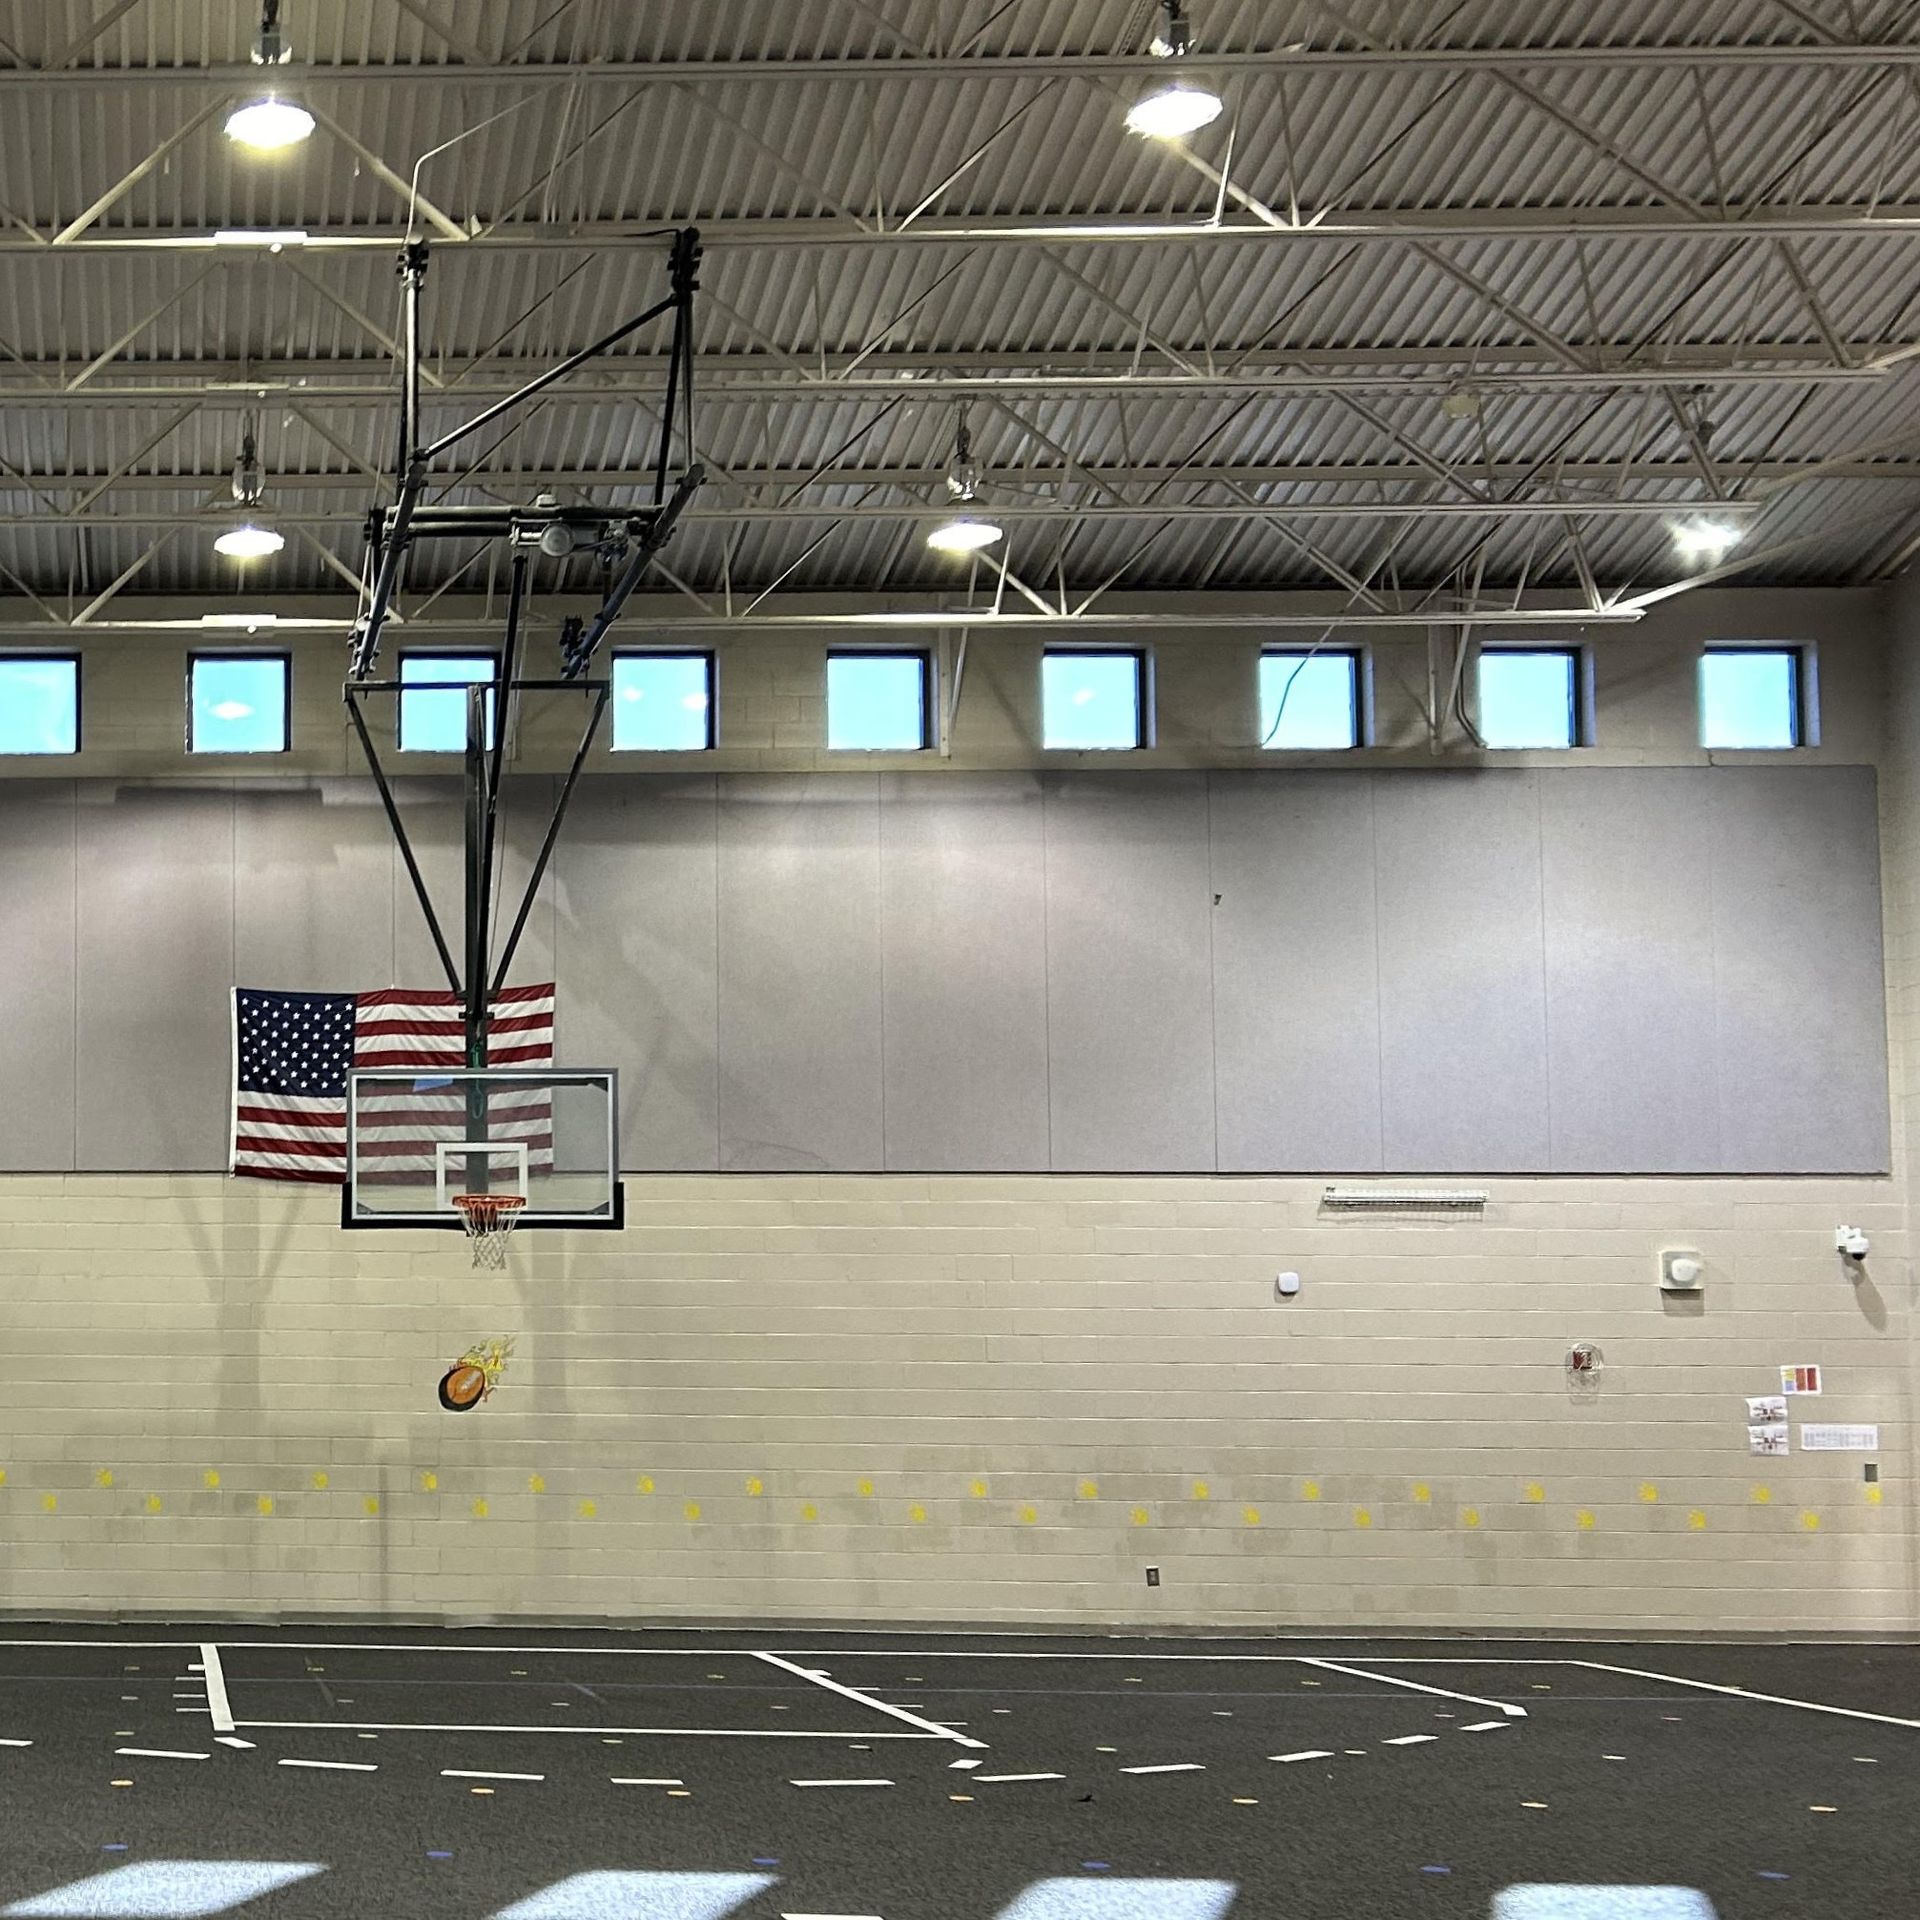 SPF Tint eliminated bright Sun distractions and heat gain through glass windows at the school Gym. Opelika AL